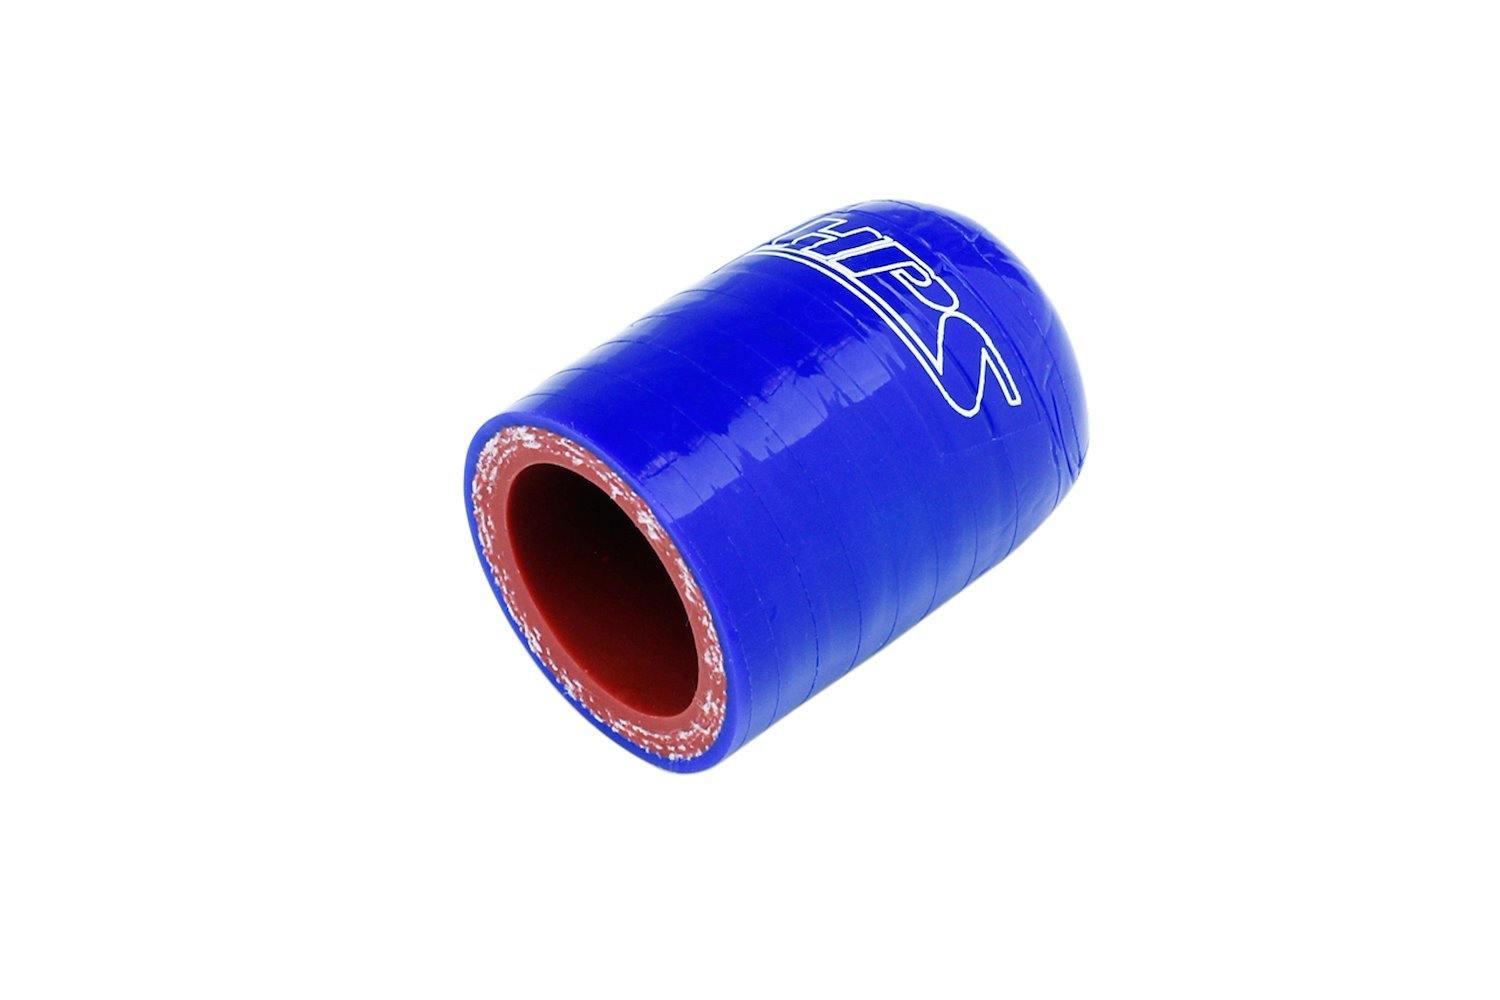 RSCC-062-BLUE Coolant Bypass Cap, 3-Ply Reinforced High-Temp. Silicone Bypass Cap, 5/8 in. ID, Blue